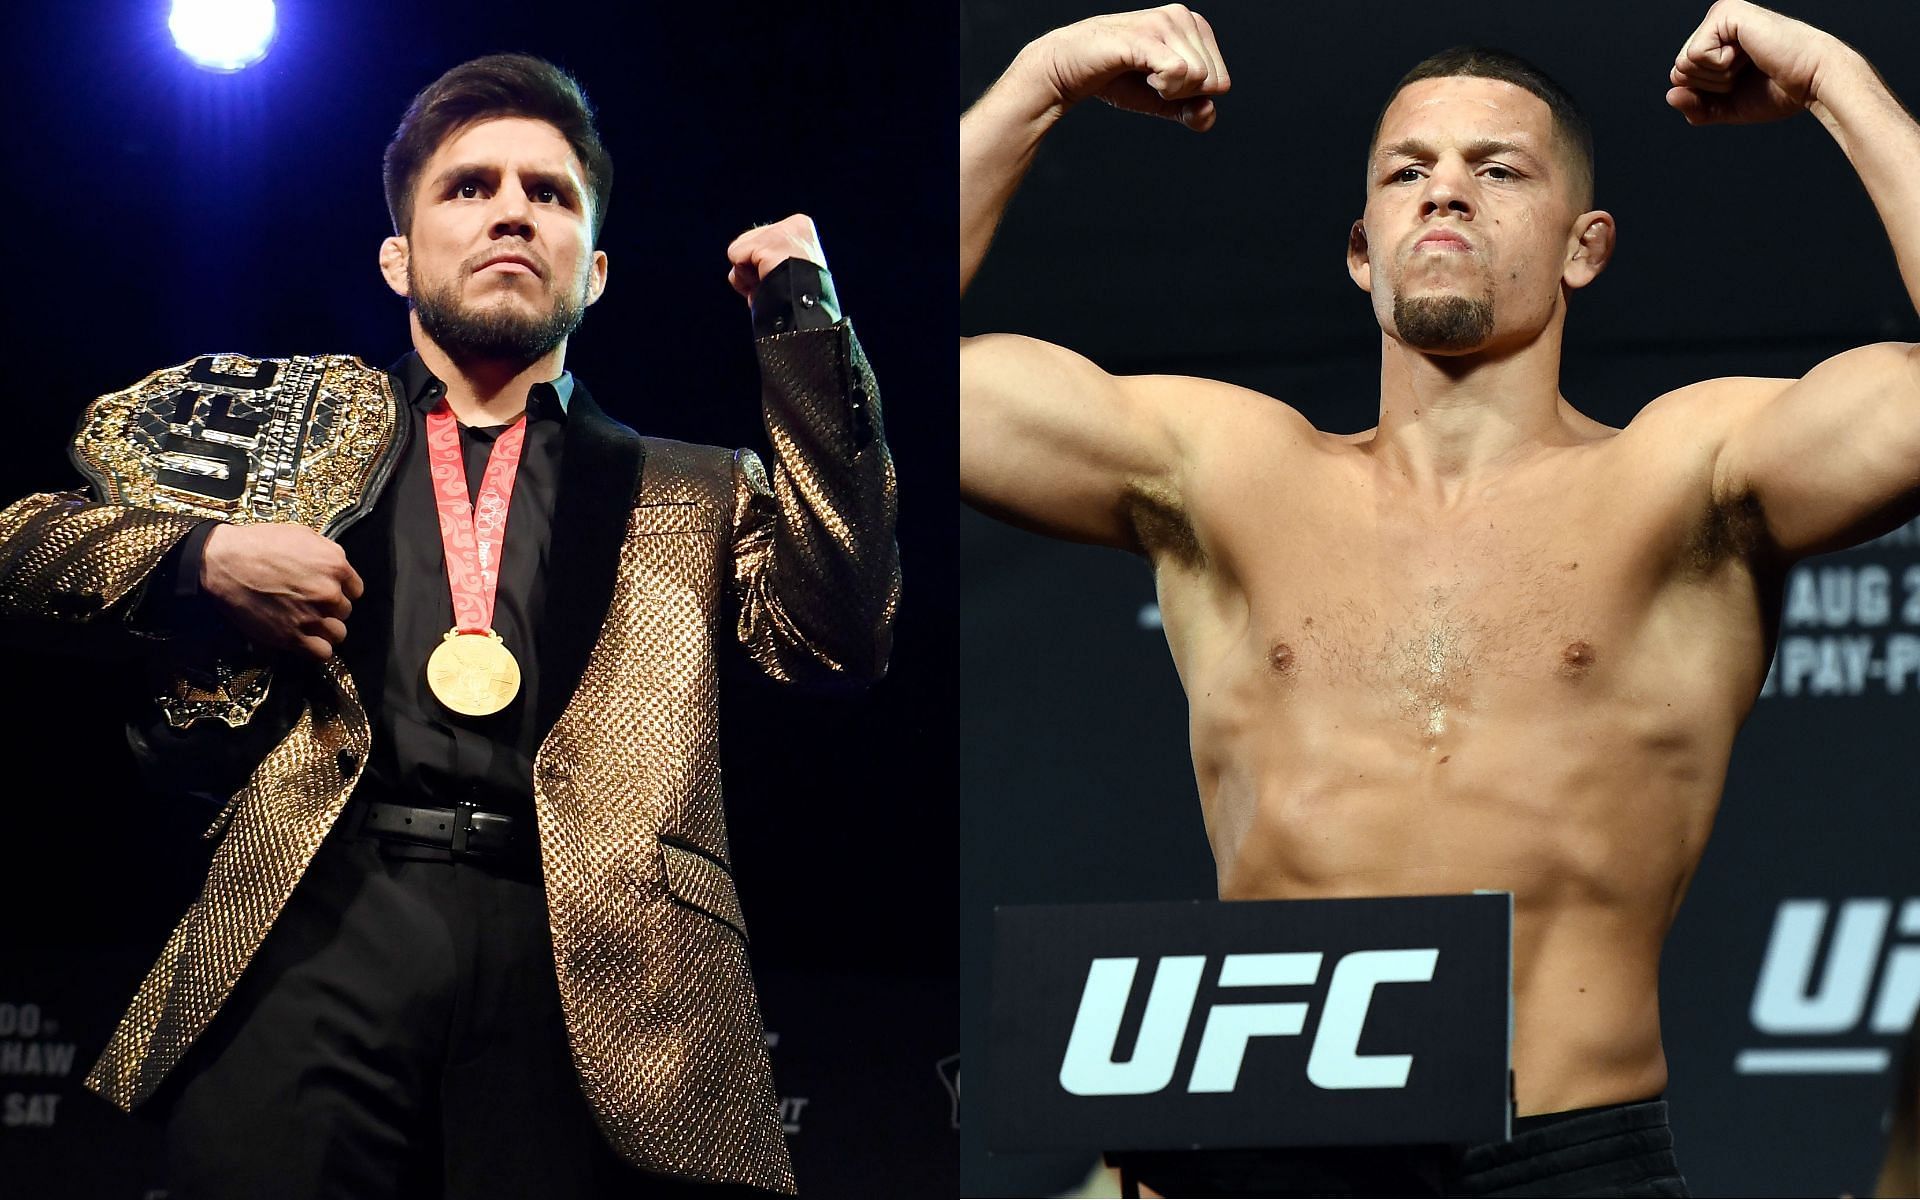 Henry Cejudo (left) and Nate Diaz (right) (Images via Getty)